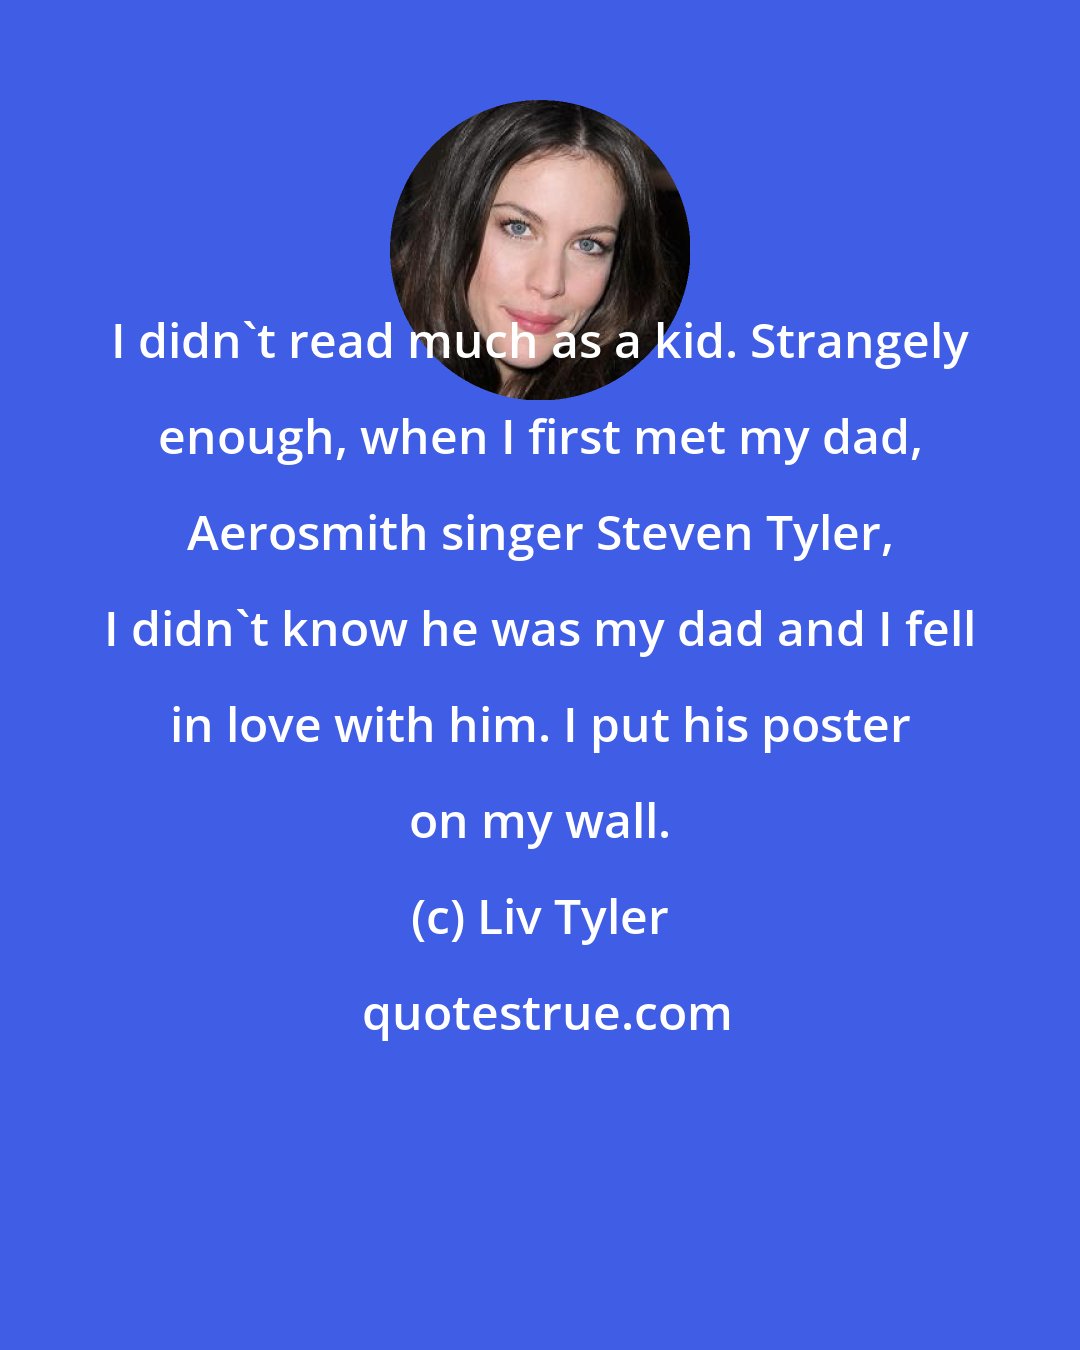 Liv Tyler: I didn't read much as a kid. Strangely enough, when I first met my dad, Aerosmith singer Steven Tyler, I didn't know he was my dad and I fell in love with him. I put his poster on my wall.